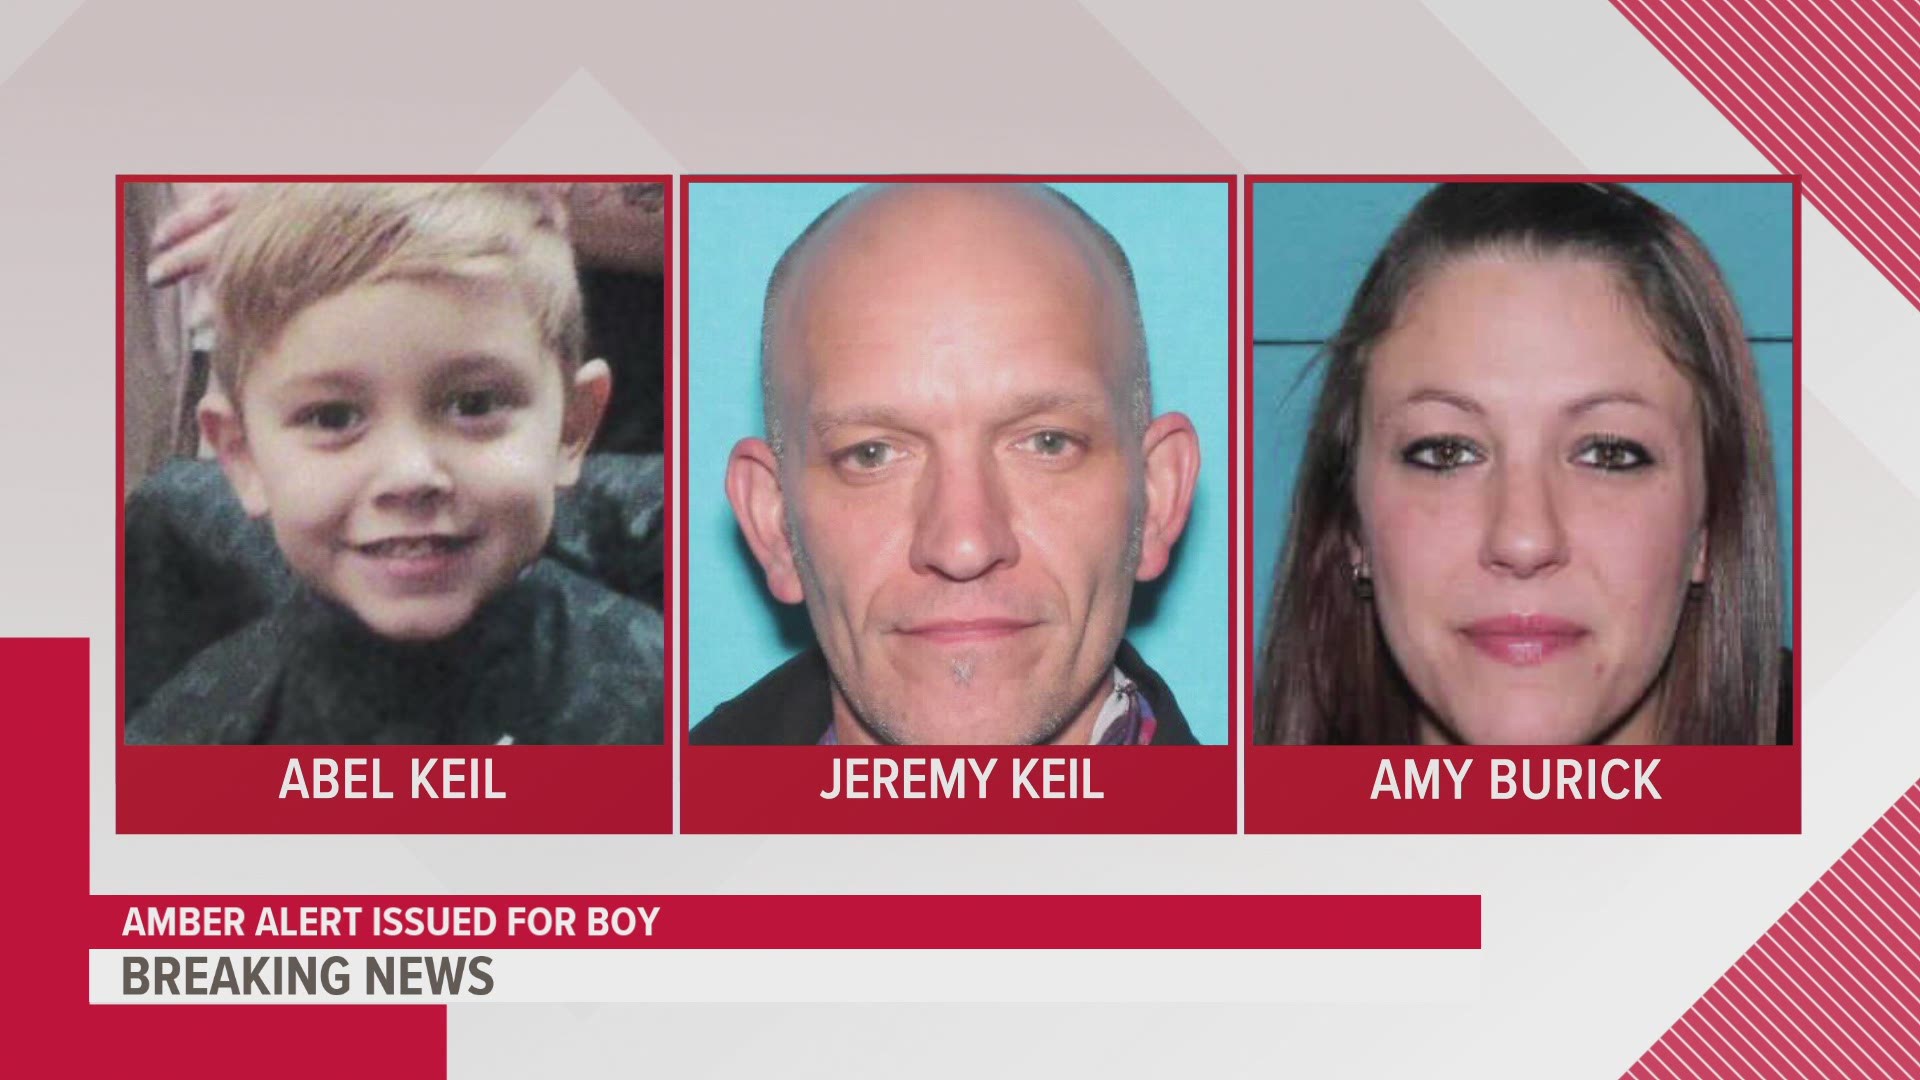 According to the alert, Abel was abducted by Jeremy Keil and Amy Burick. They are driving a silver Honda CRV heading to either Clinton or Davenport.